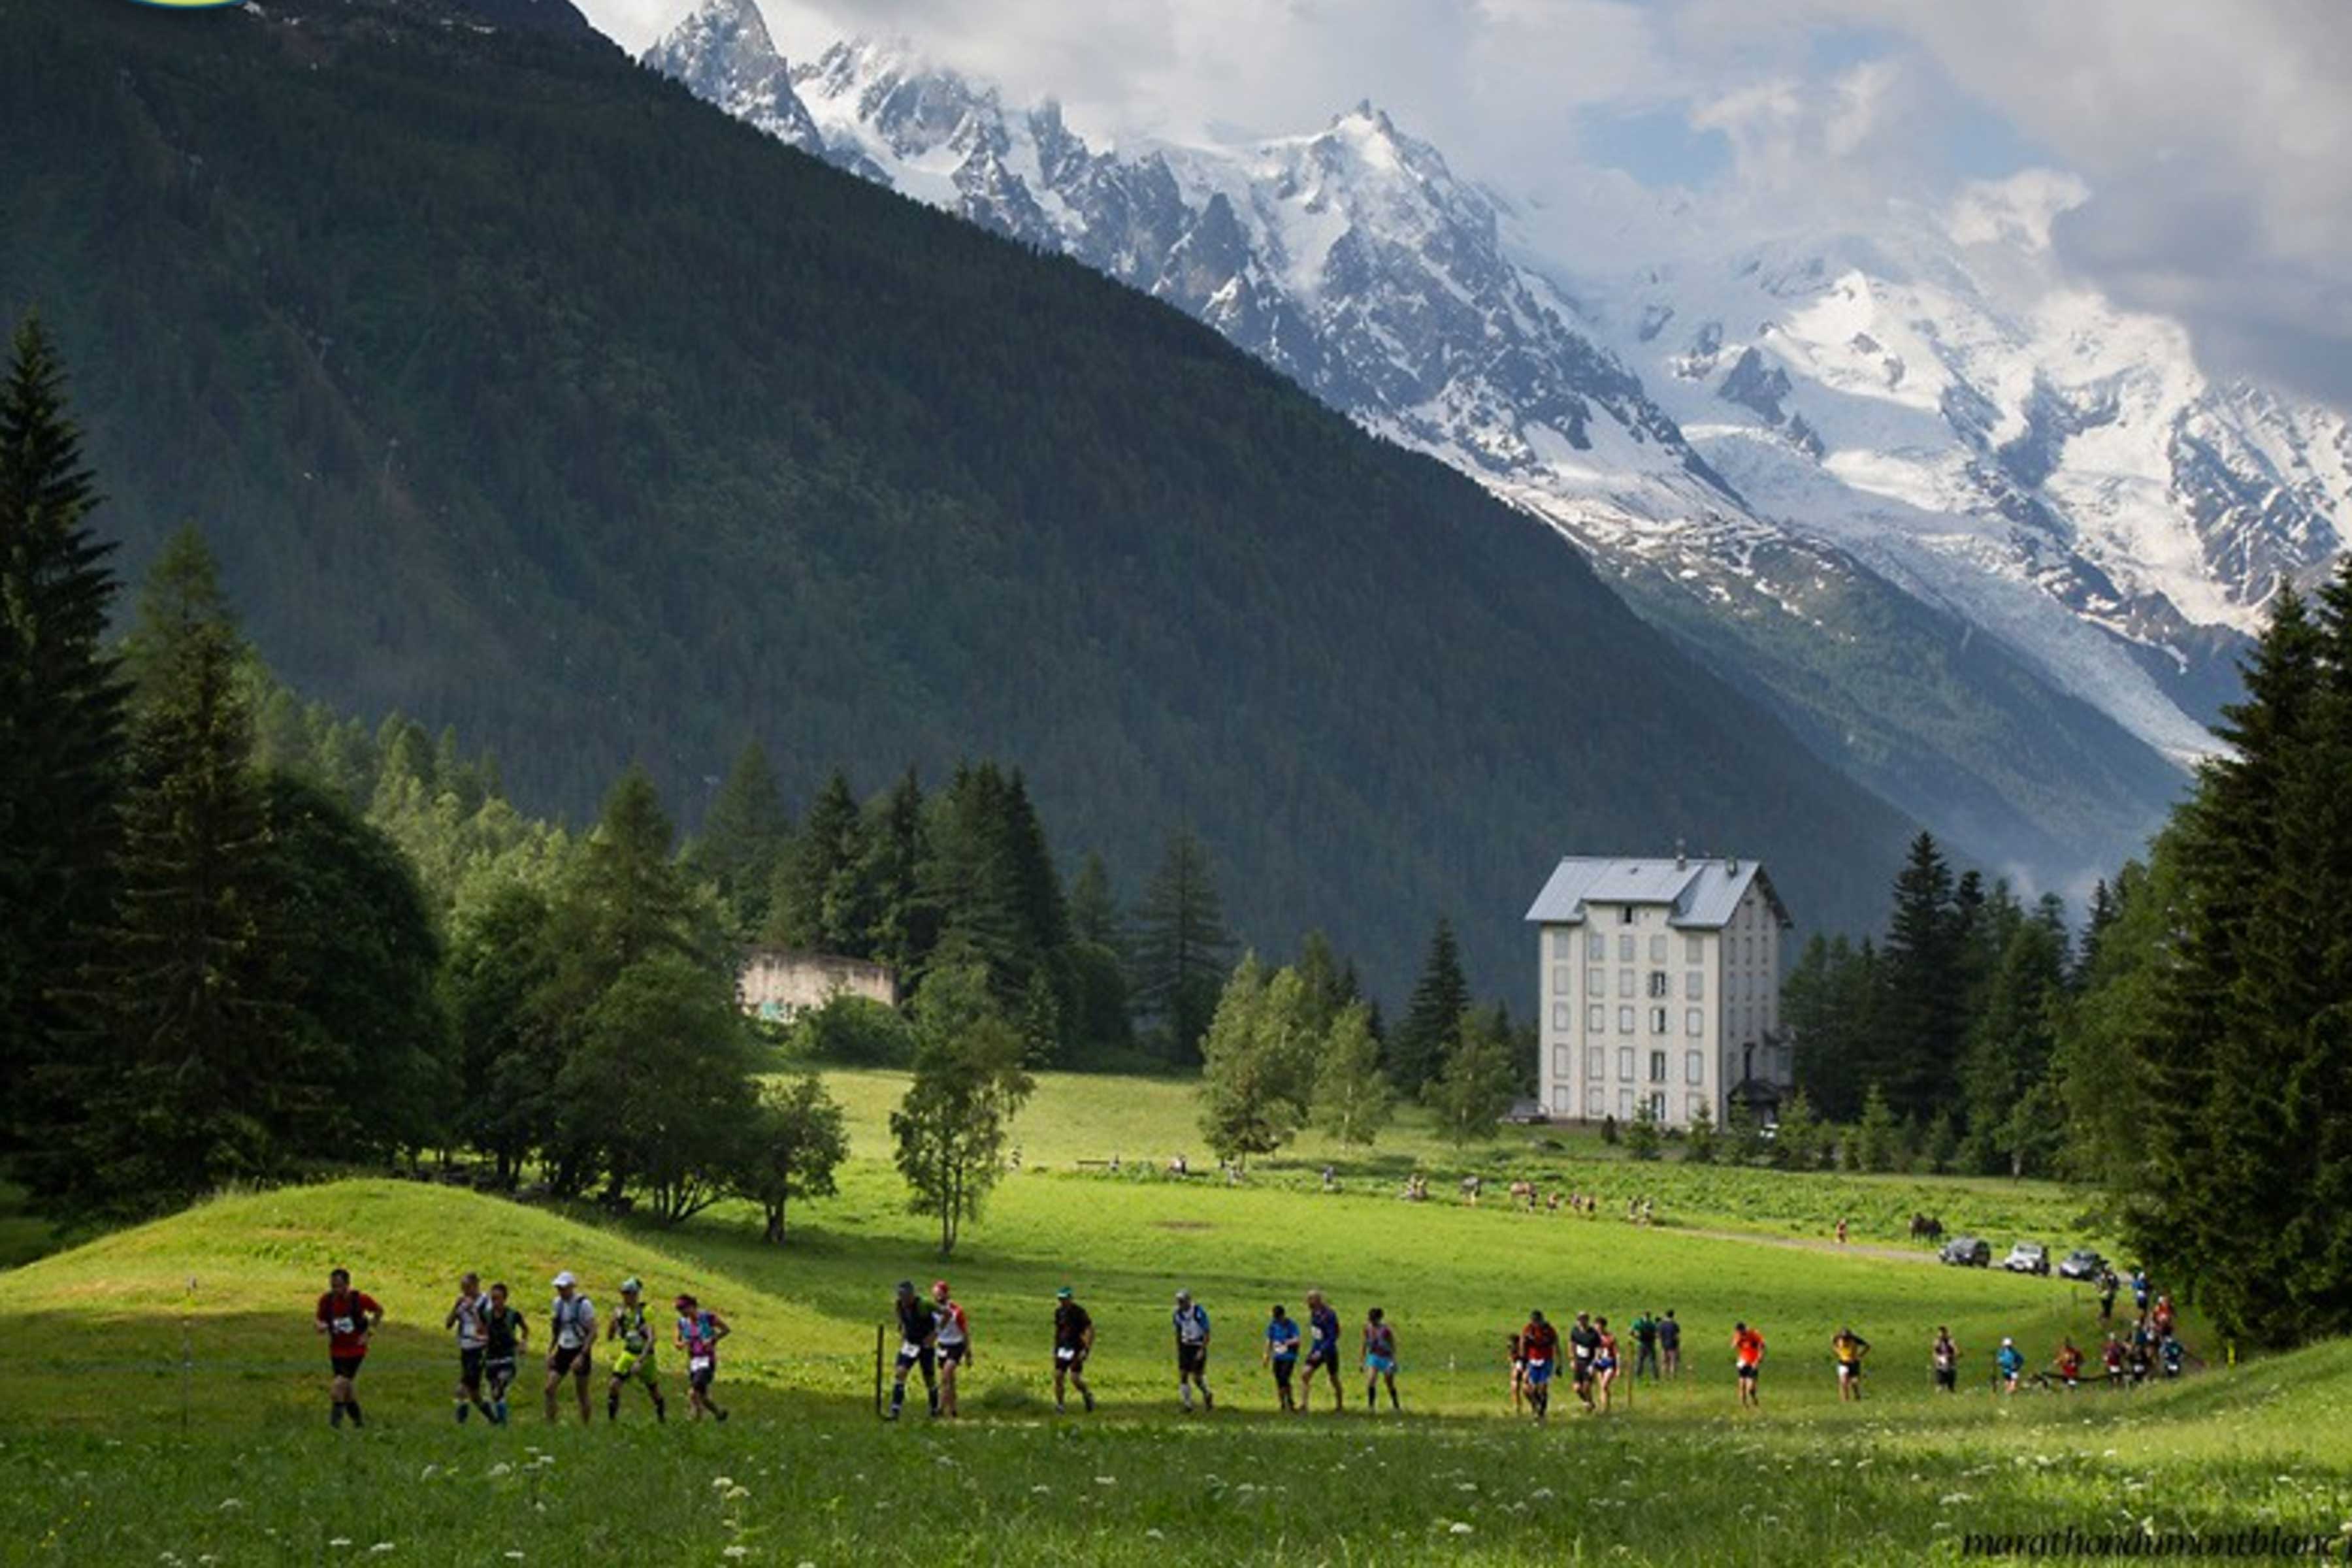 We’re at the Mont Blanc Marathon this weekend